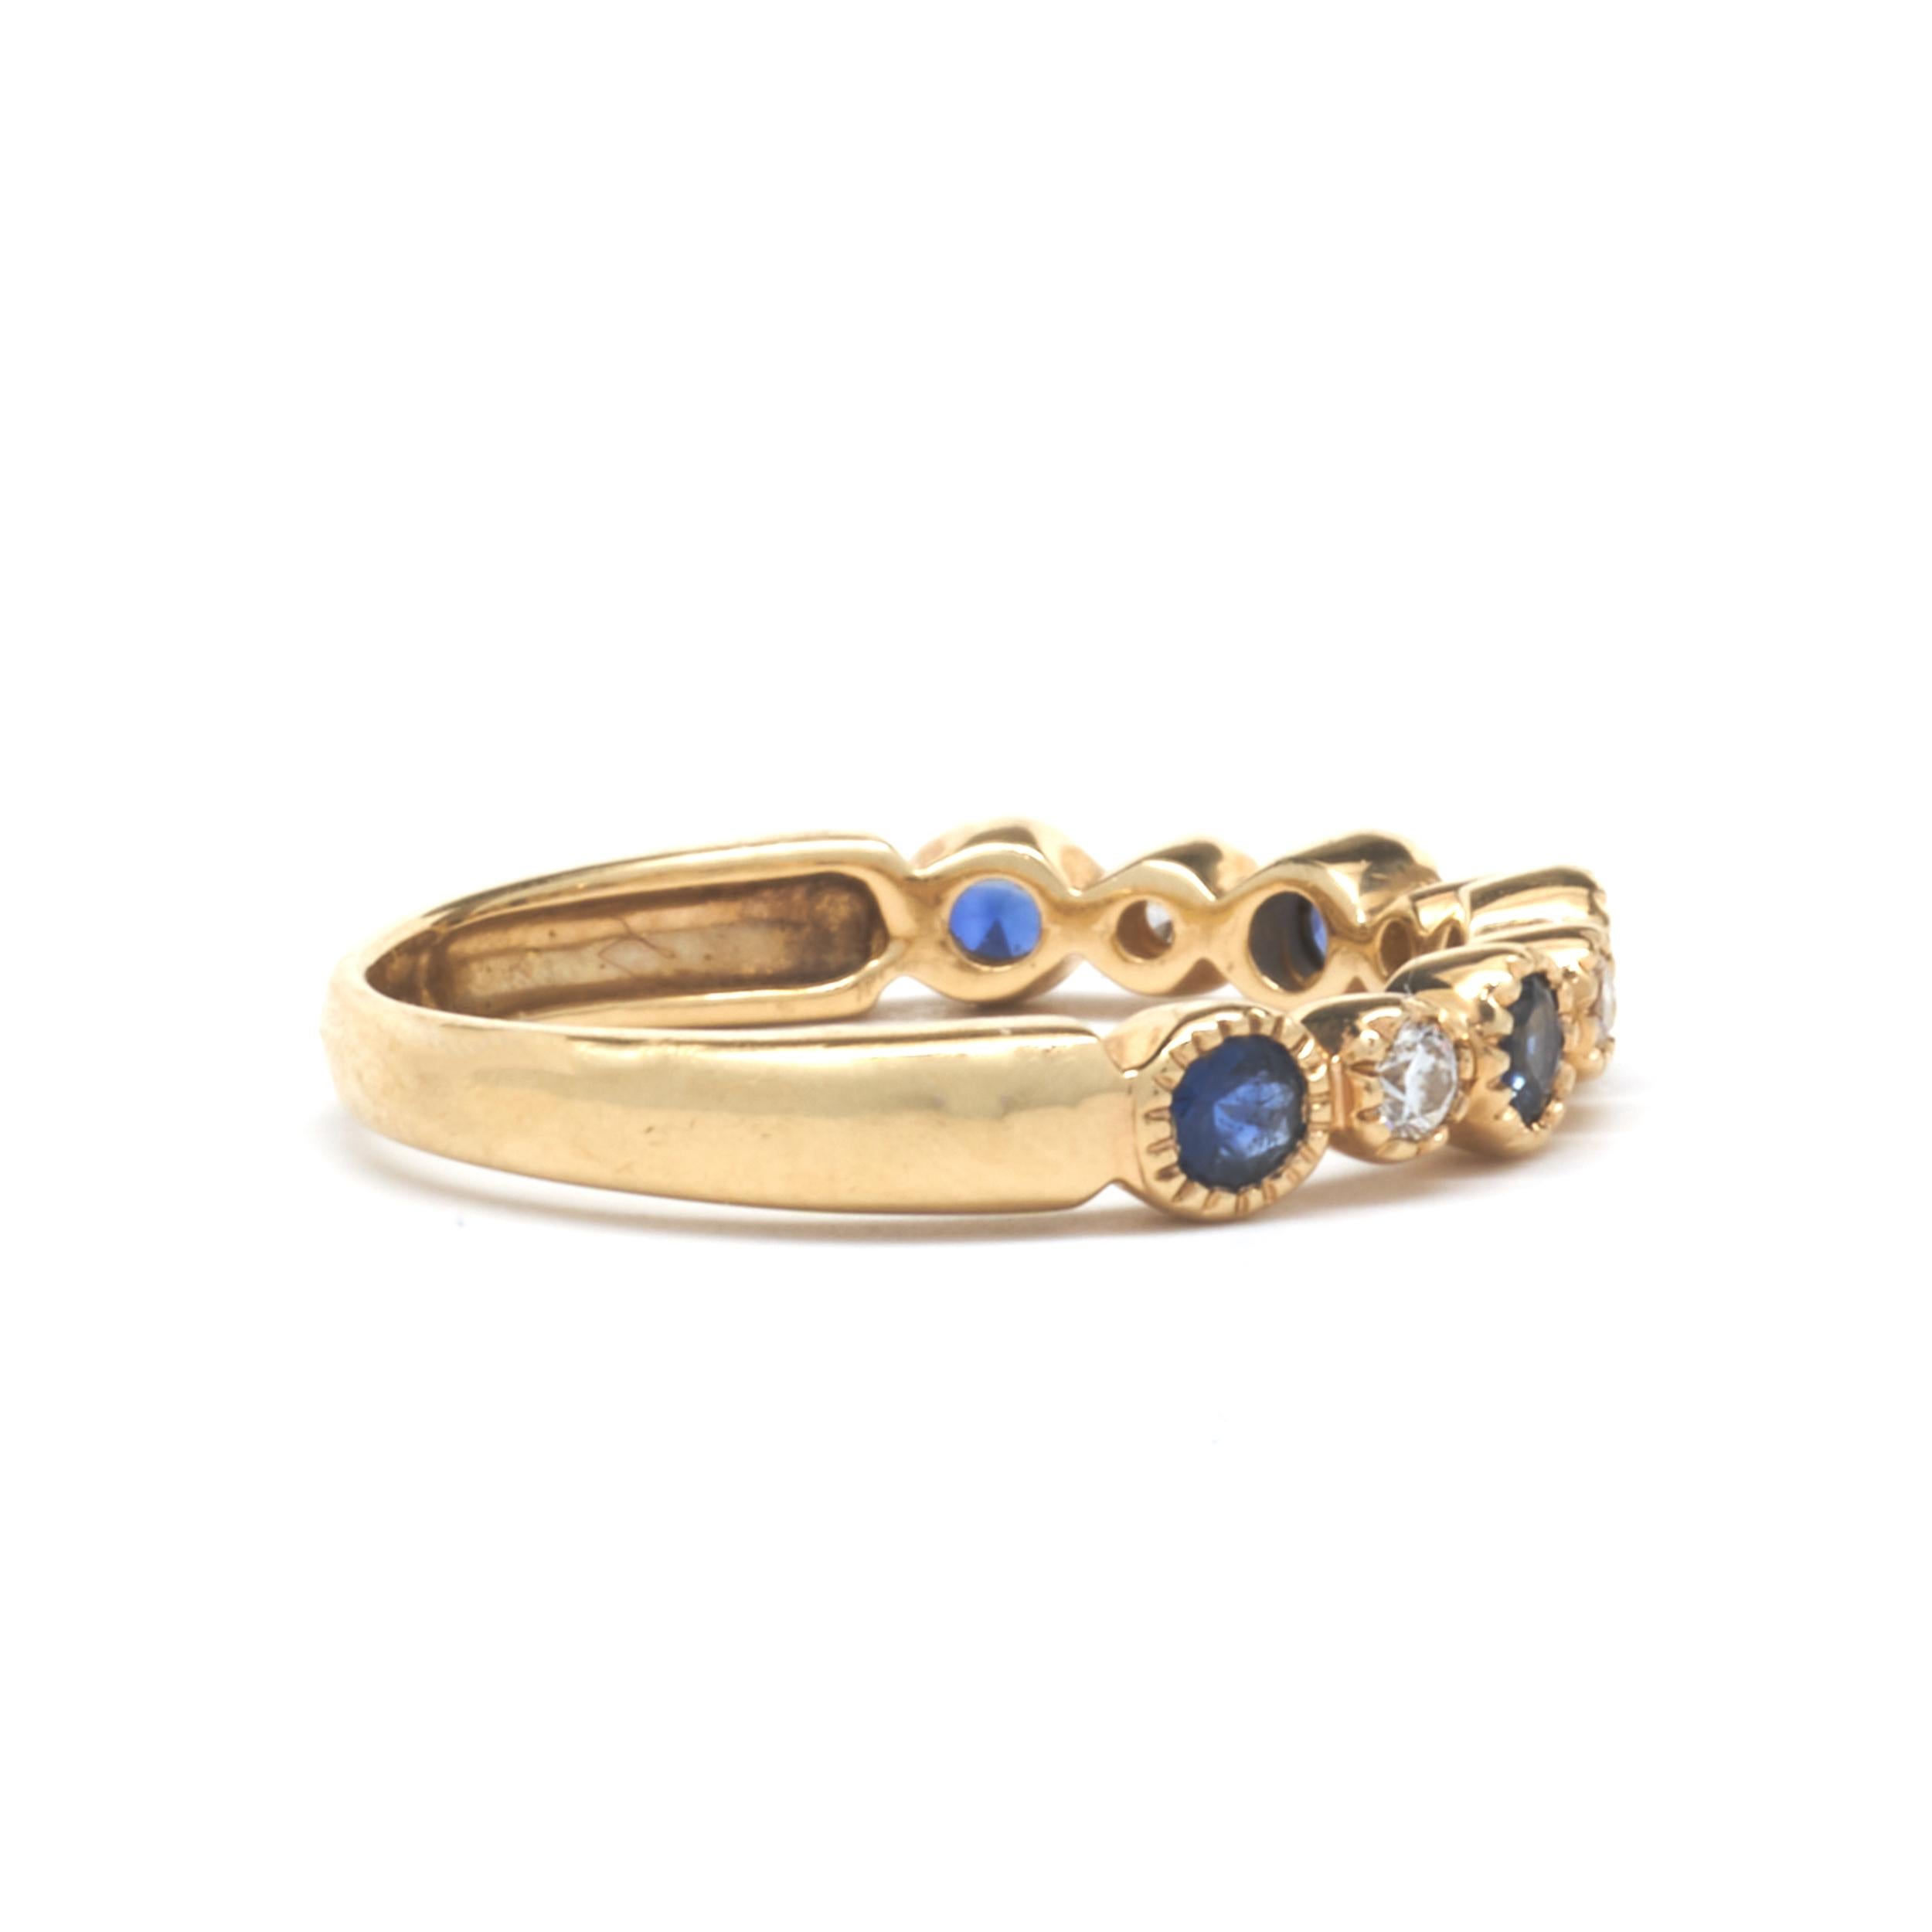 Designer: custom design
Material: 14K yellow gold
Diamond: 4 round brilliant cut = .11cttw
Color: G
Clarity: VS1
Sapphire: 5 round cut = .45cttw
Dimensions: ring top measures 3.21mm wide
Ring Size: 5.5 (please allow two extra shipping days for